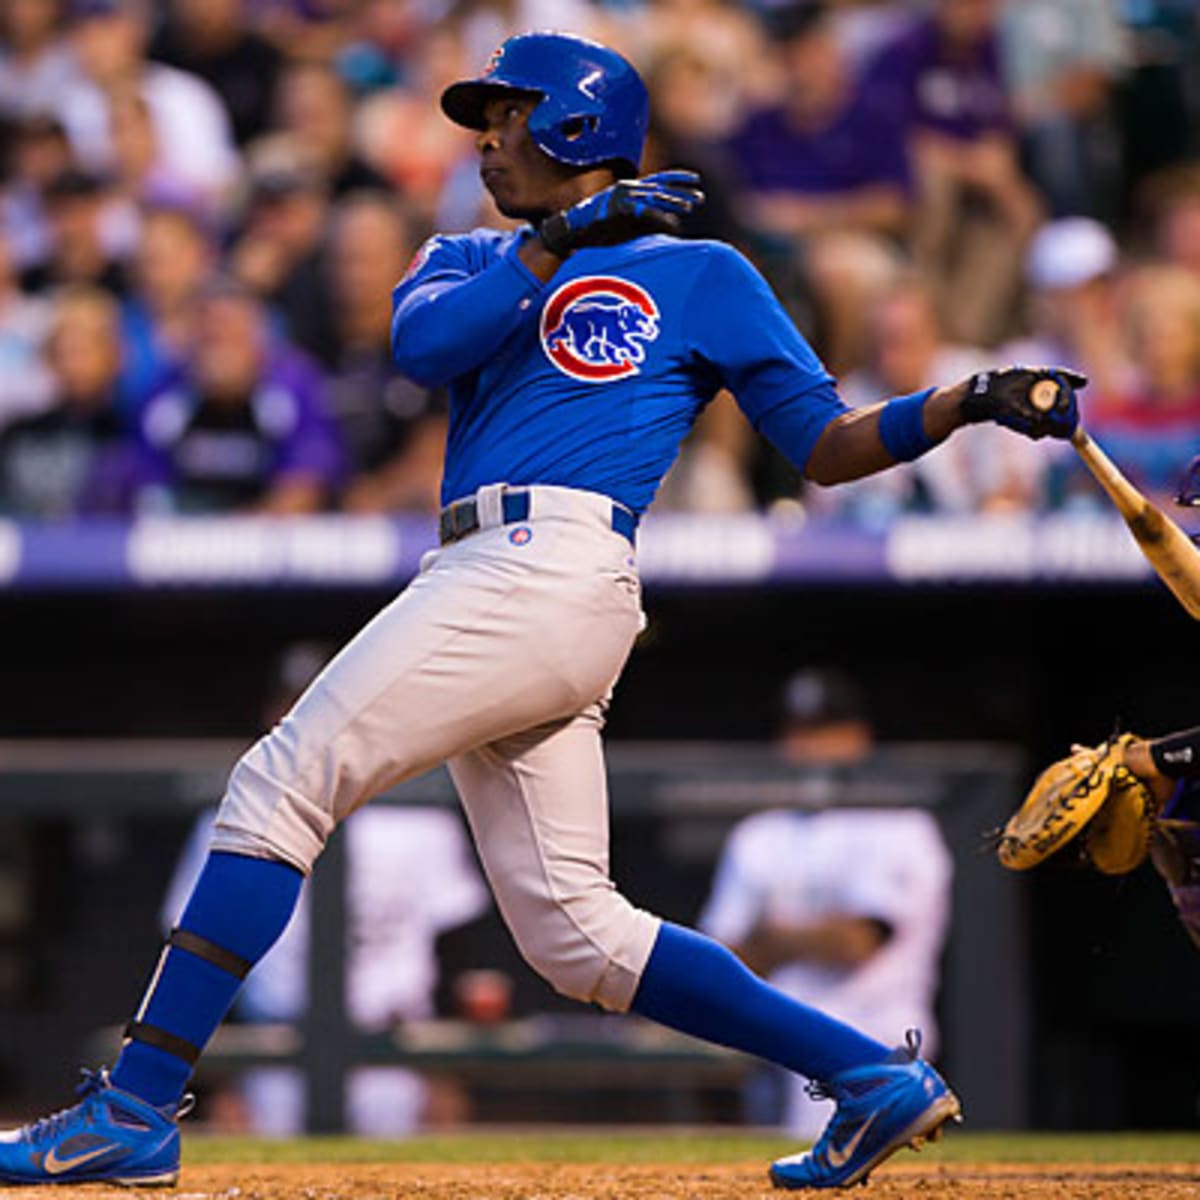 Ex-Yankees star Alfonso Soriano looks jacked beyond belief at Cubs